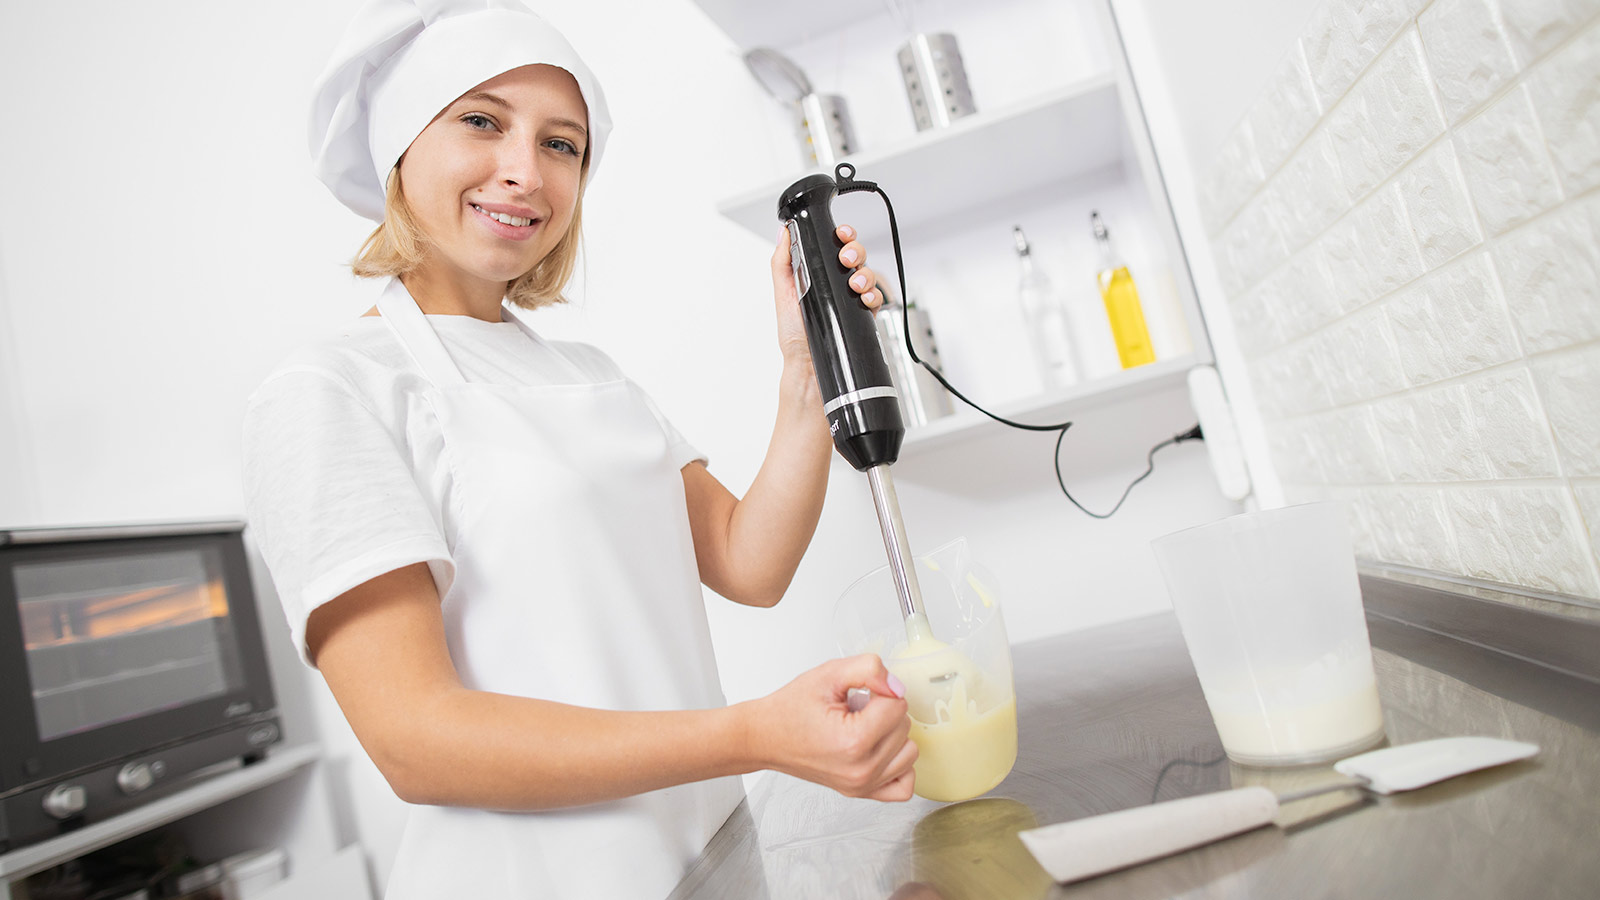 Young attractive girl pastry chef, wearing white apron and hat, prepares cream sauce or ganache for cake or cookies, holding a hand blender in her hand and mixes ingredients